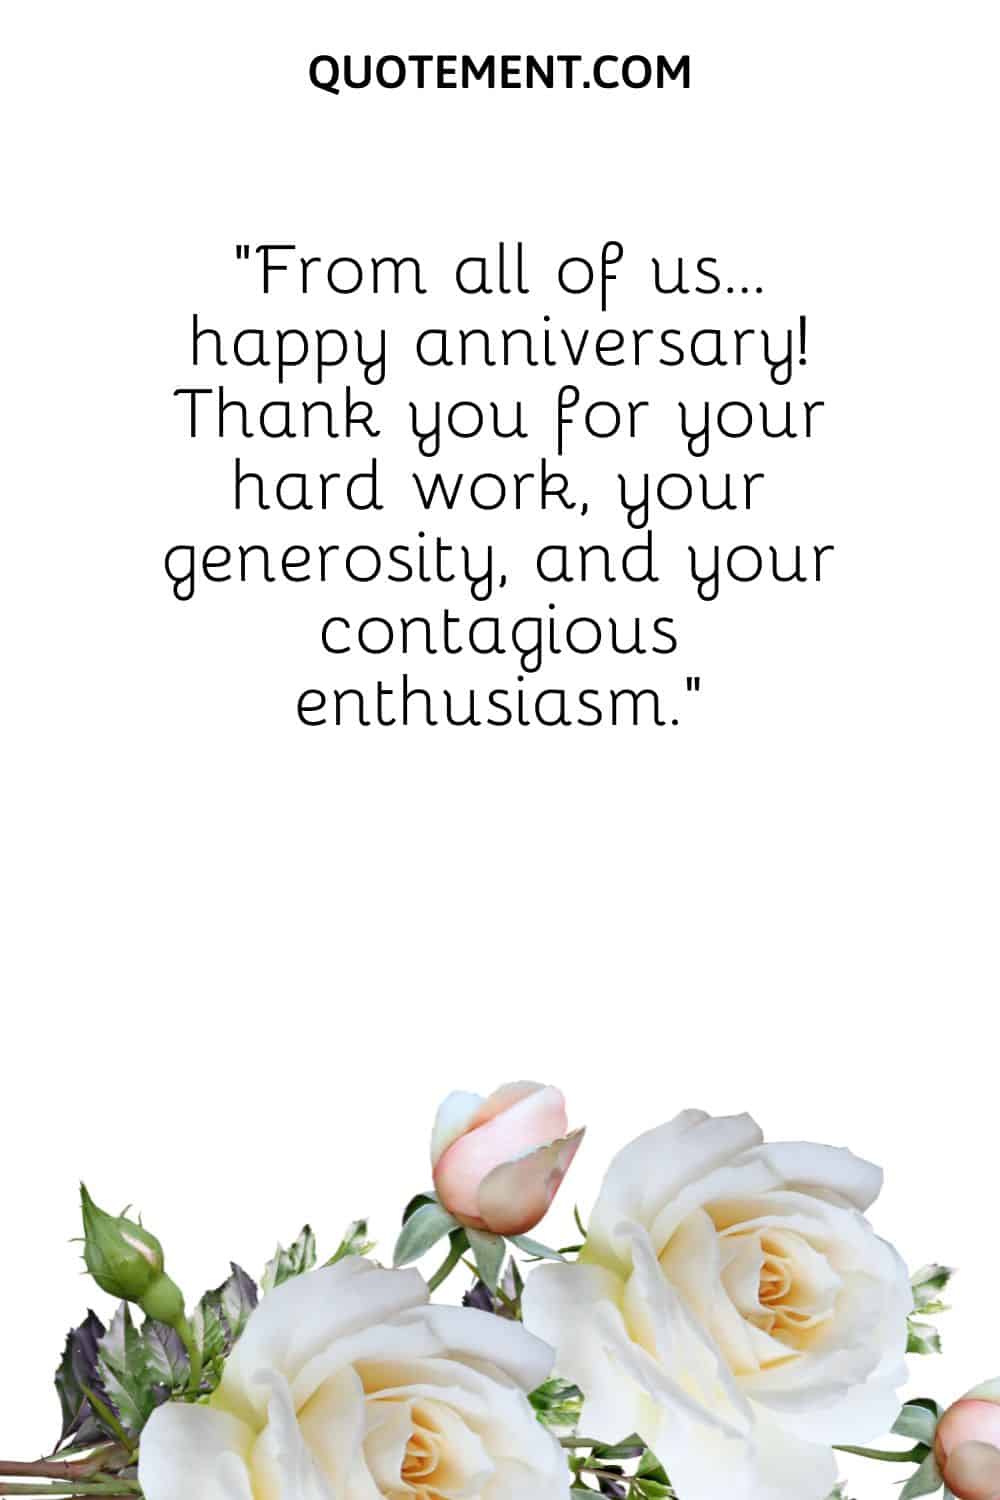 “From all of us… happy anniversary! Thank you for your hard work, your generosity, and your contagious enthusiasm.”